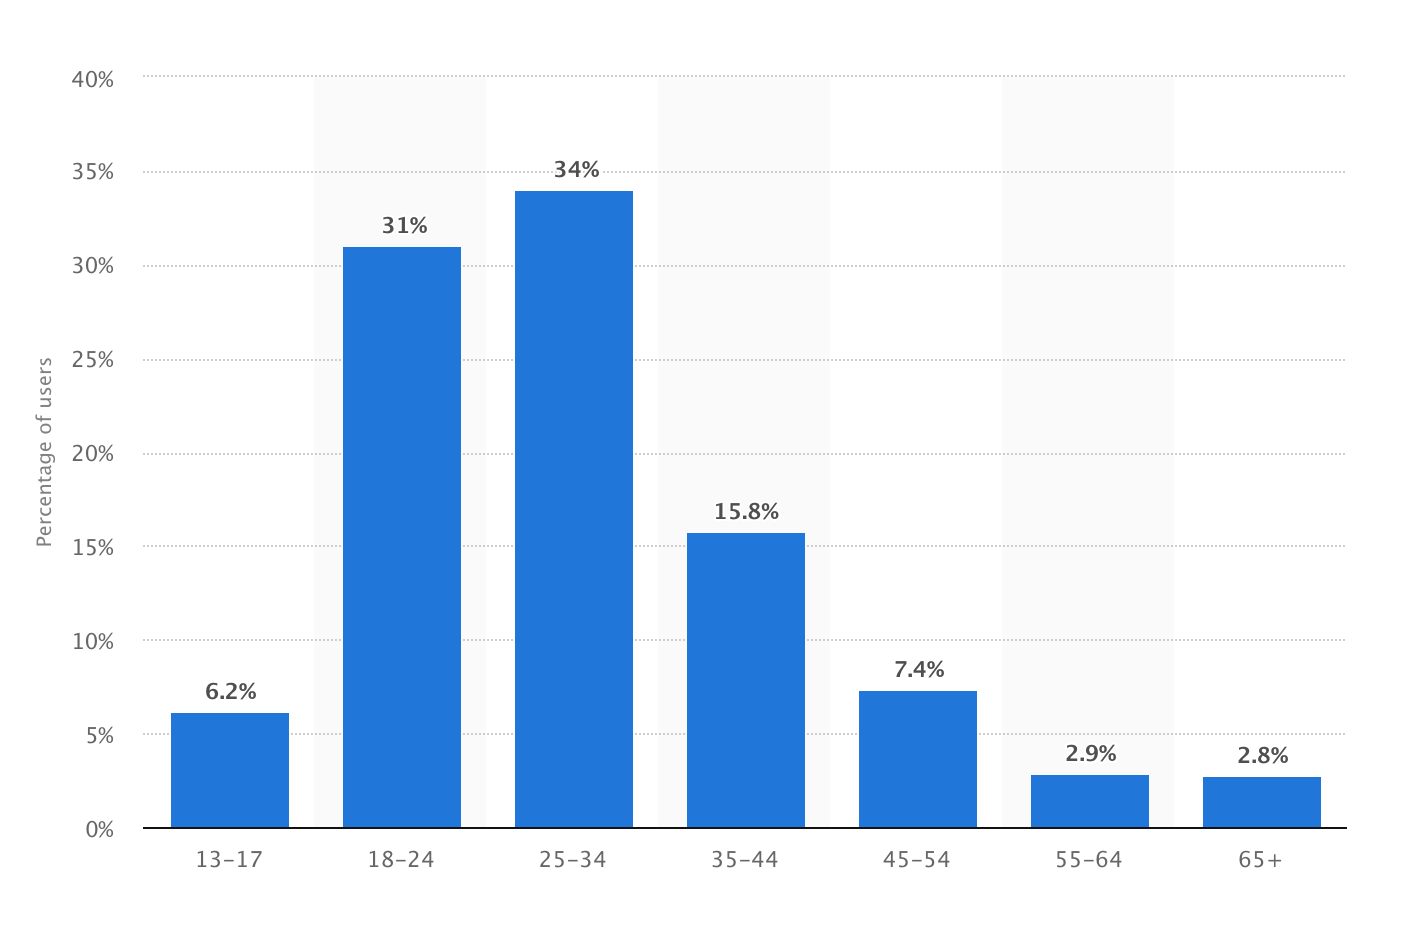 Distribution of Instagram users worldwide as of July 2019, by age group. Image by statistia.com.